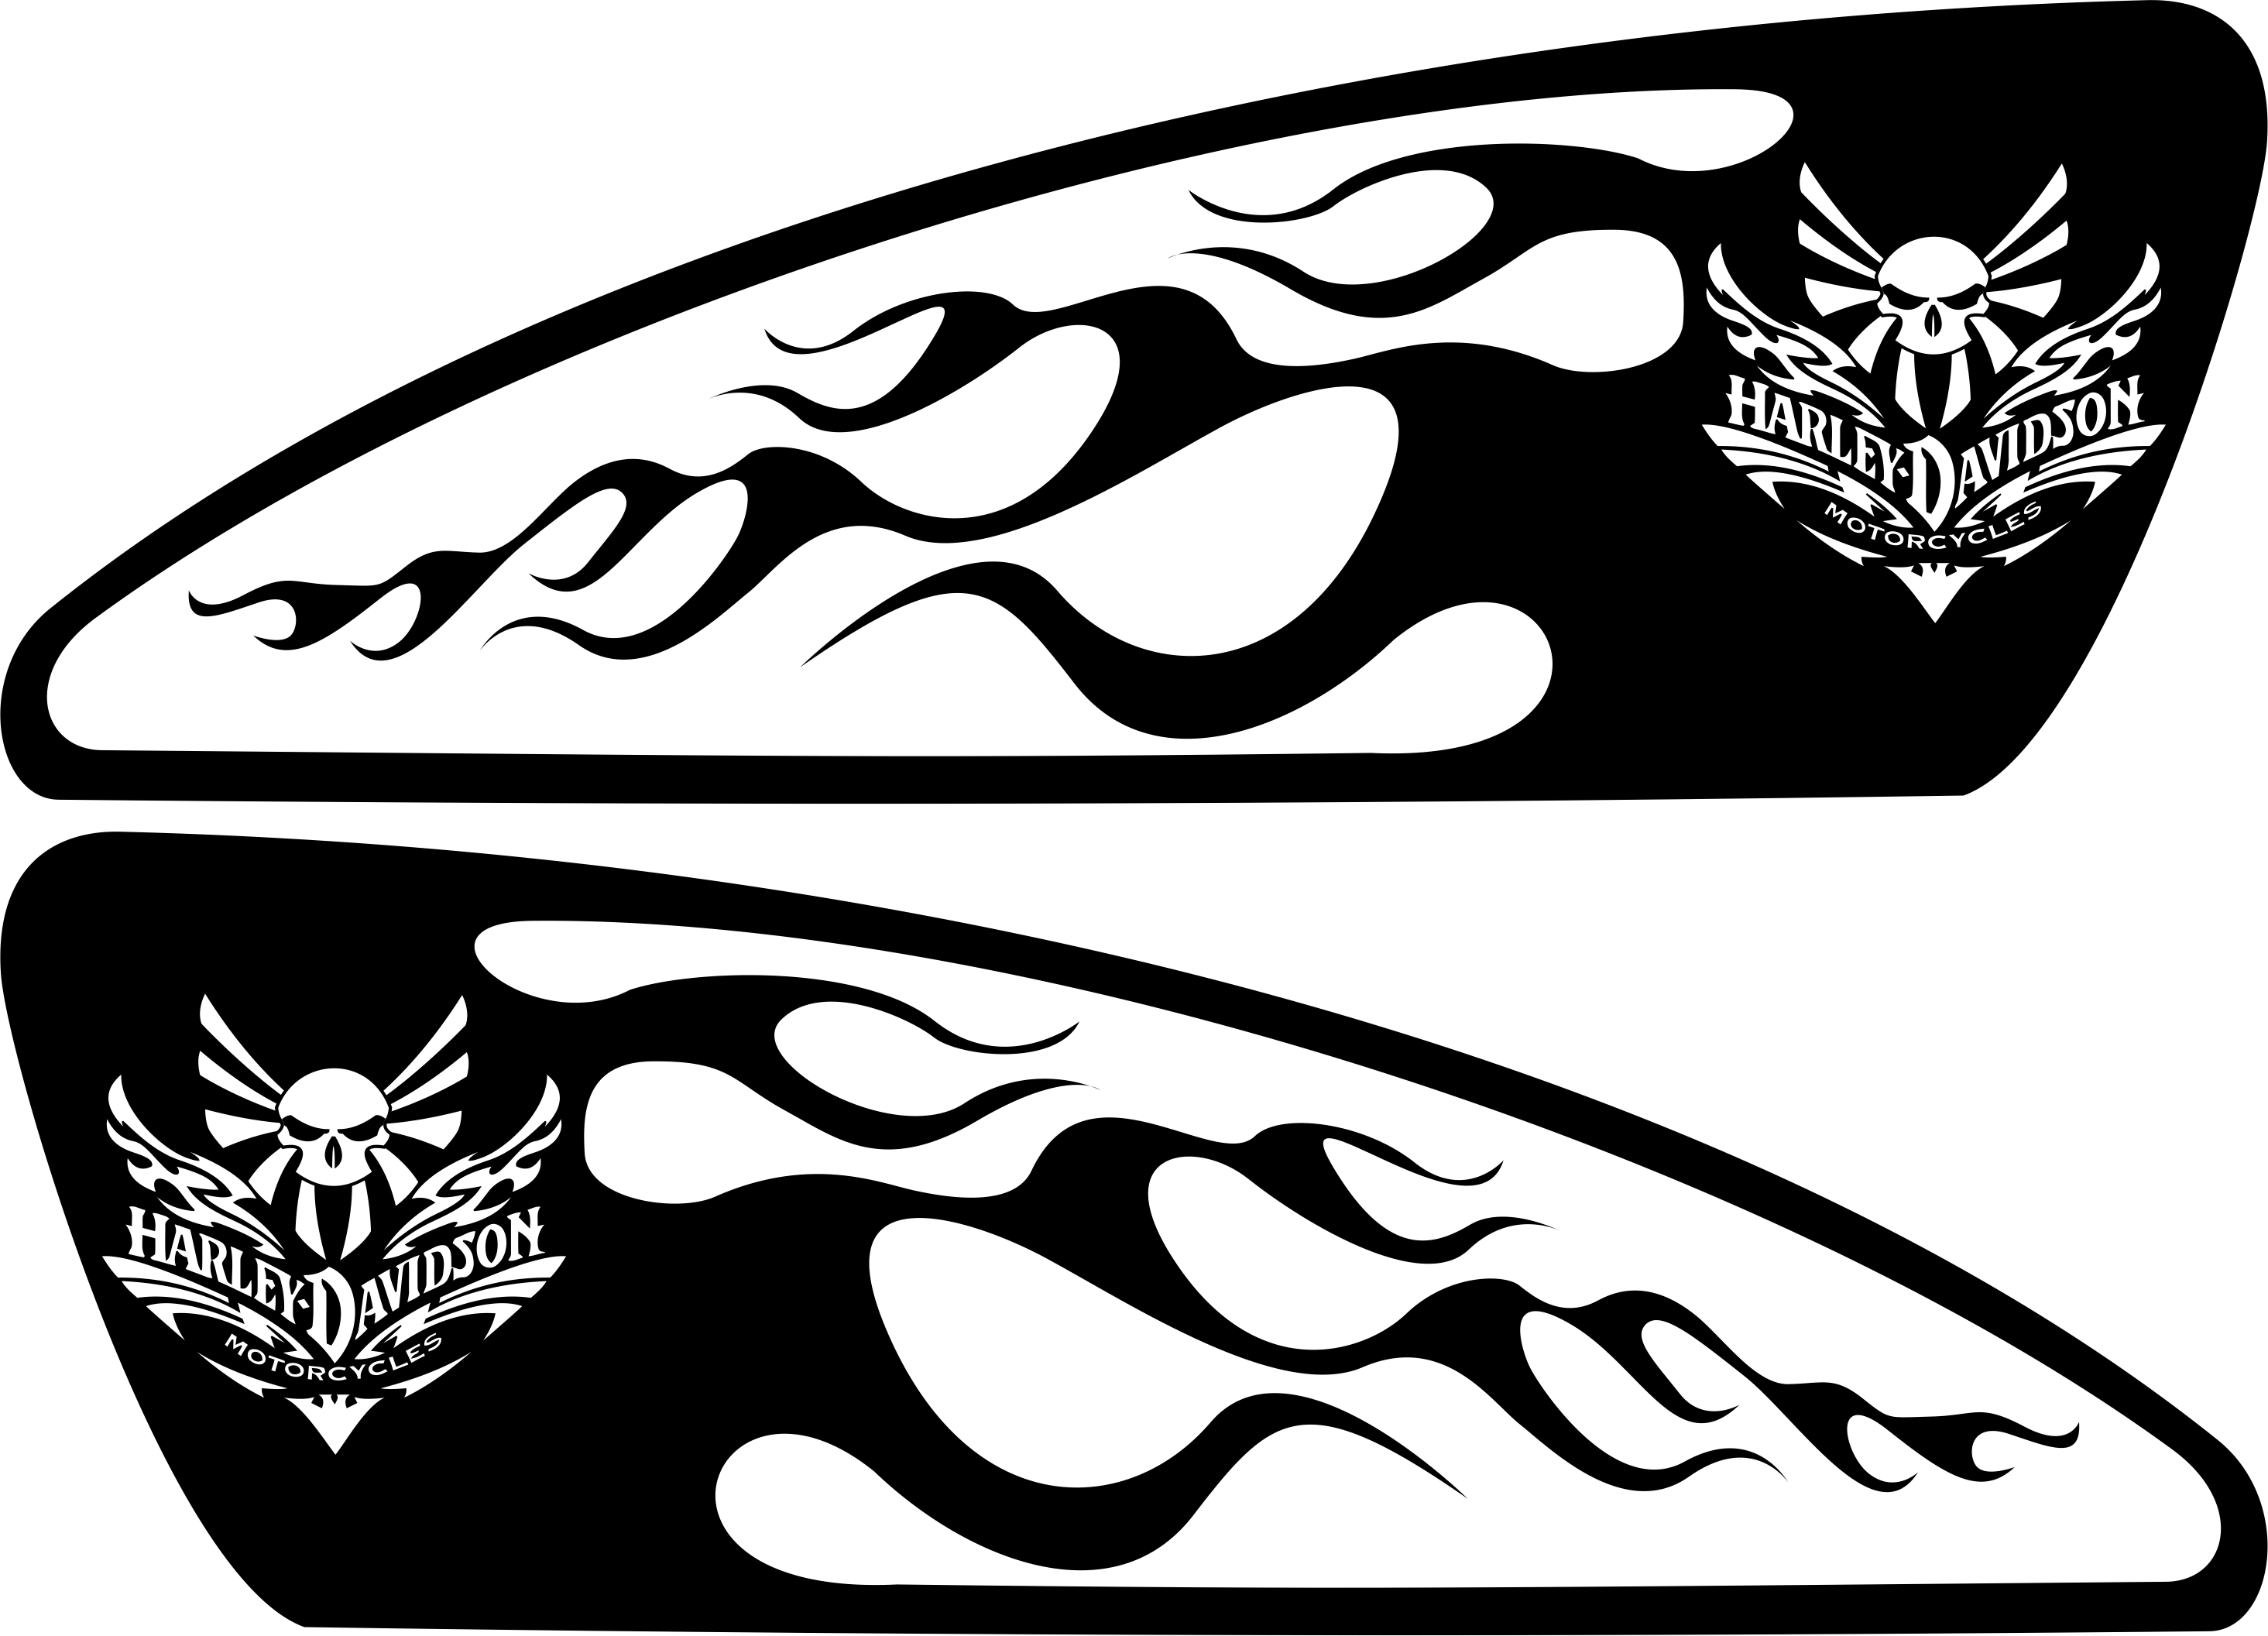 free-harley-davidson-silhouette-decal-download-free-harley-davidson